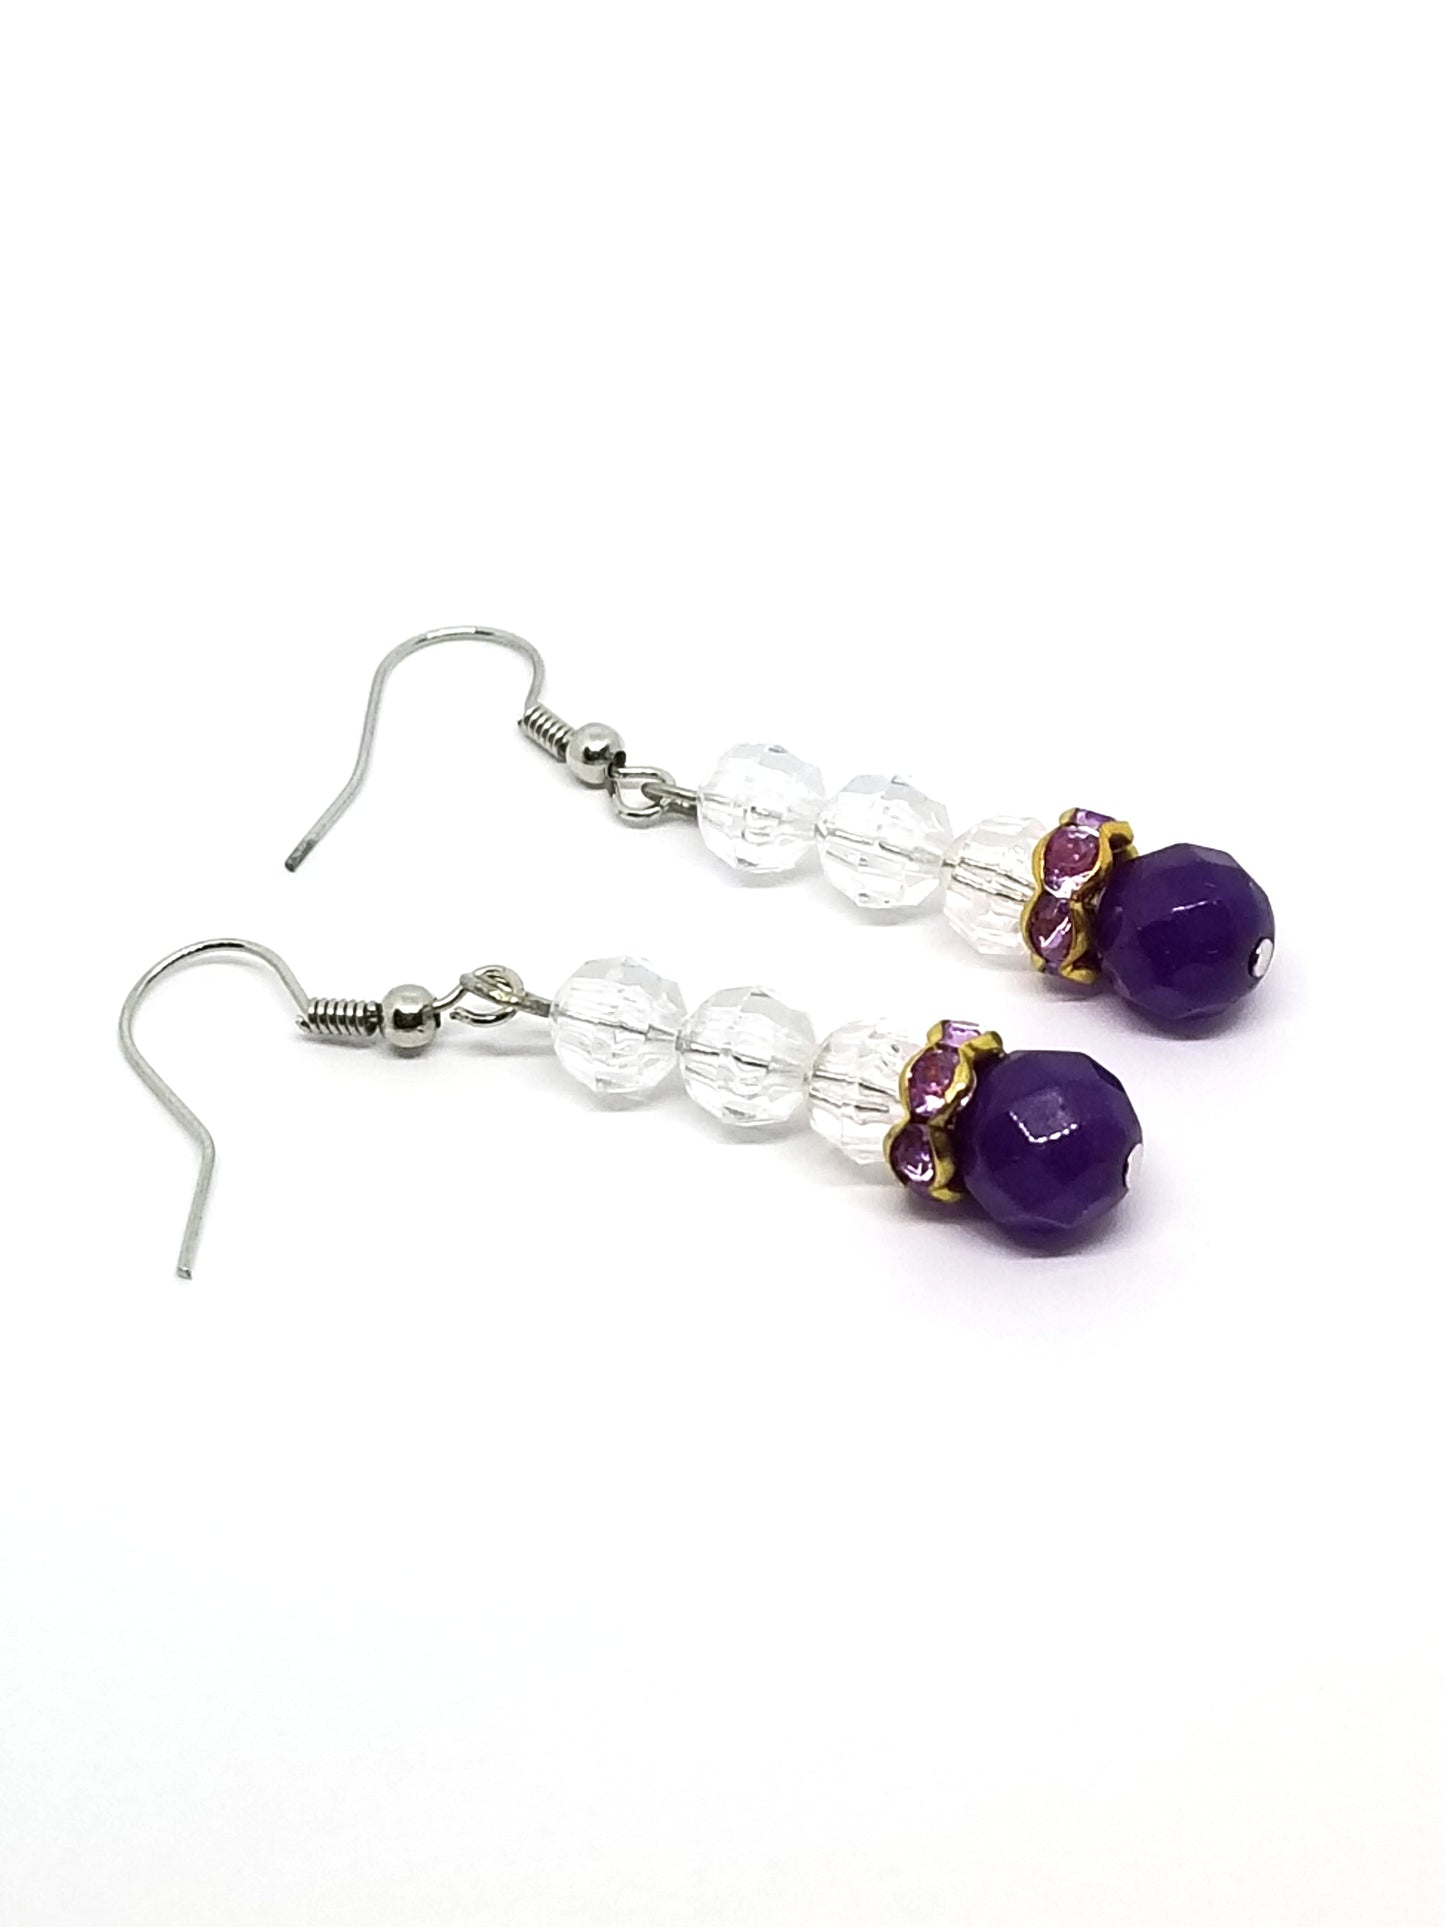 Crystal Earrings with Purple Amethyst Round Beads